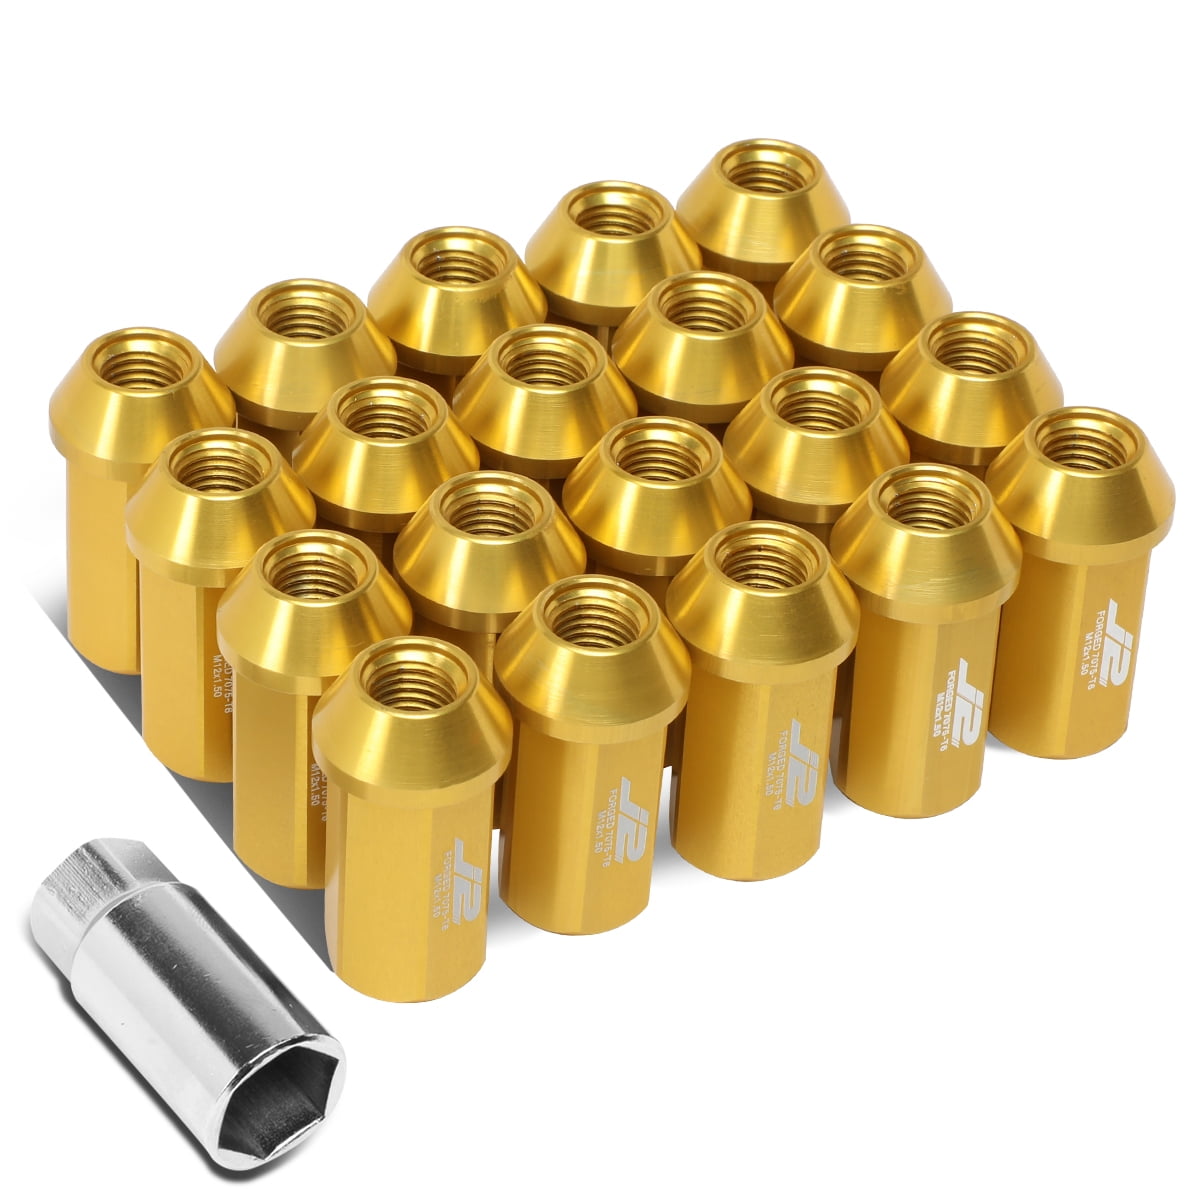 J2 Engineering 7075-T6 Replacement forged Aluminum M12 x 1.5 45mm 20Pcs Open-End Lug Nut Red Adapter 